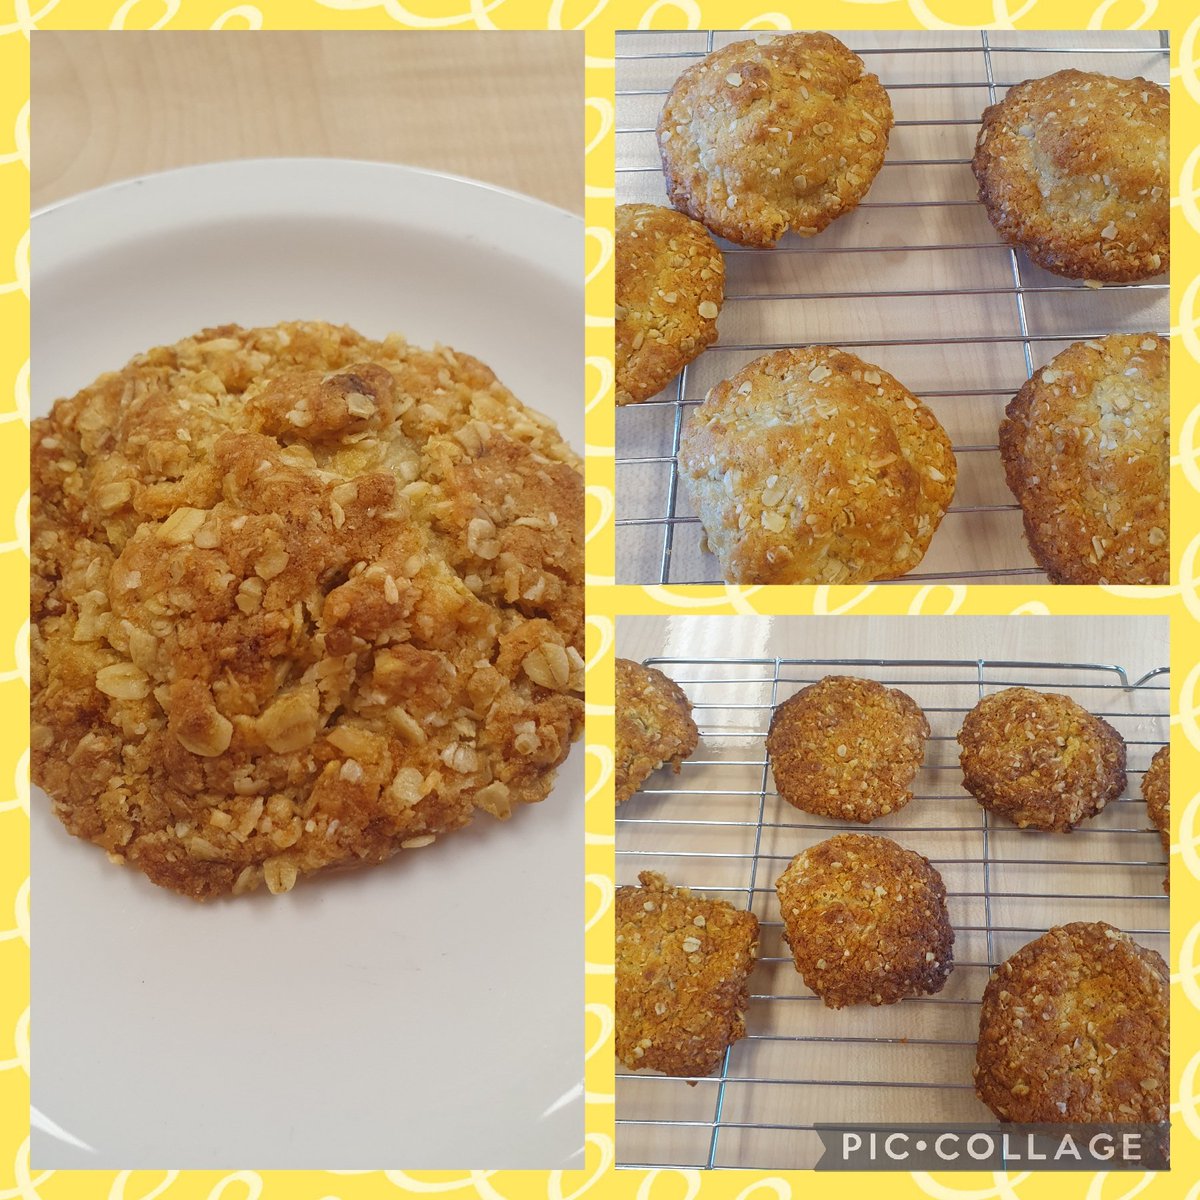 As part of Foods around the world' 1G1 pupils made Anzac biscuits this week - lots of history with these biscuits 👍🇳🇿😋 @Greenwood_Acad #growingyou